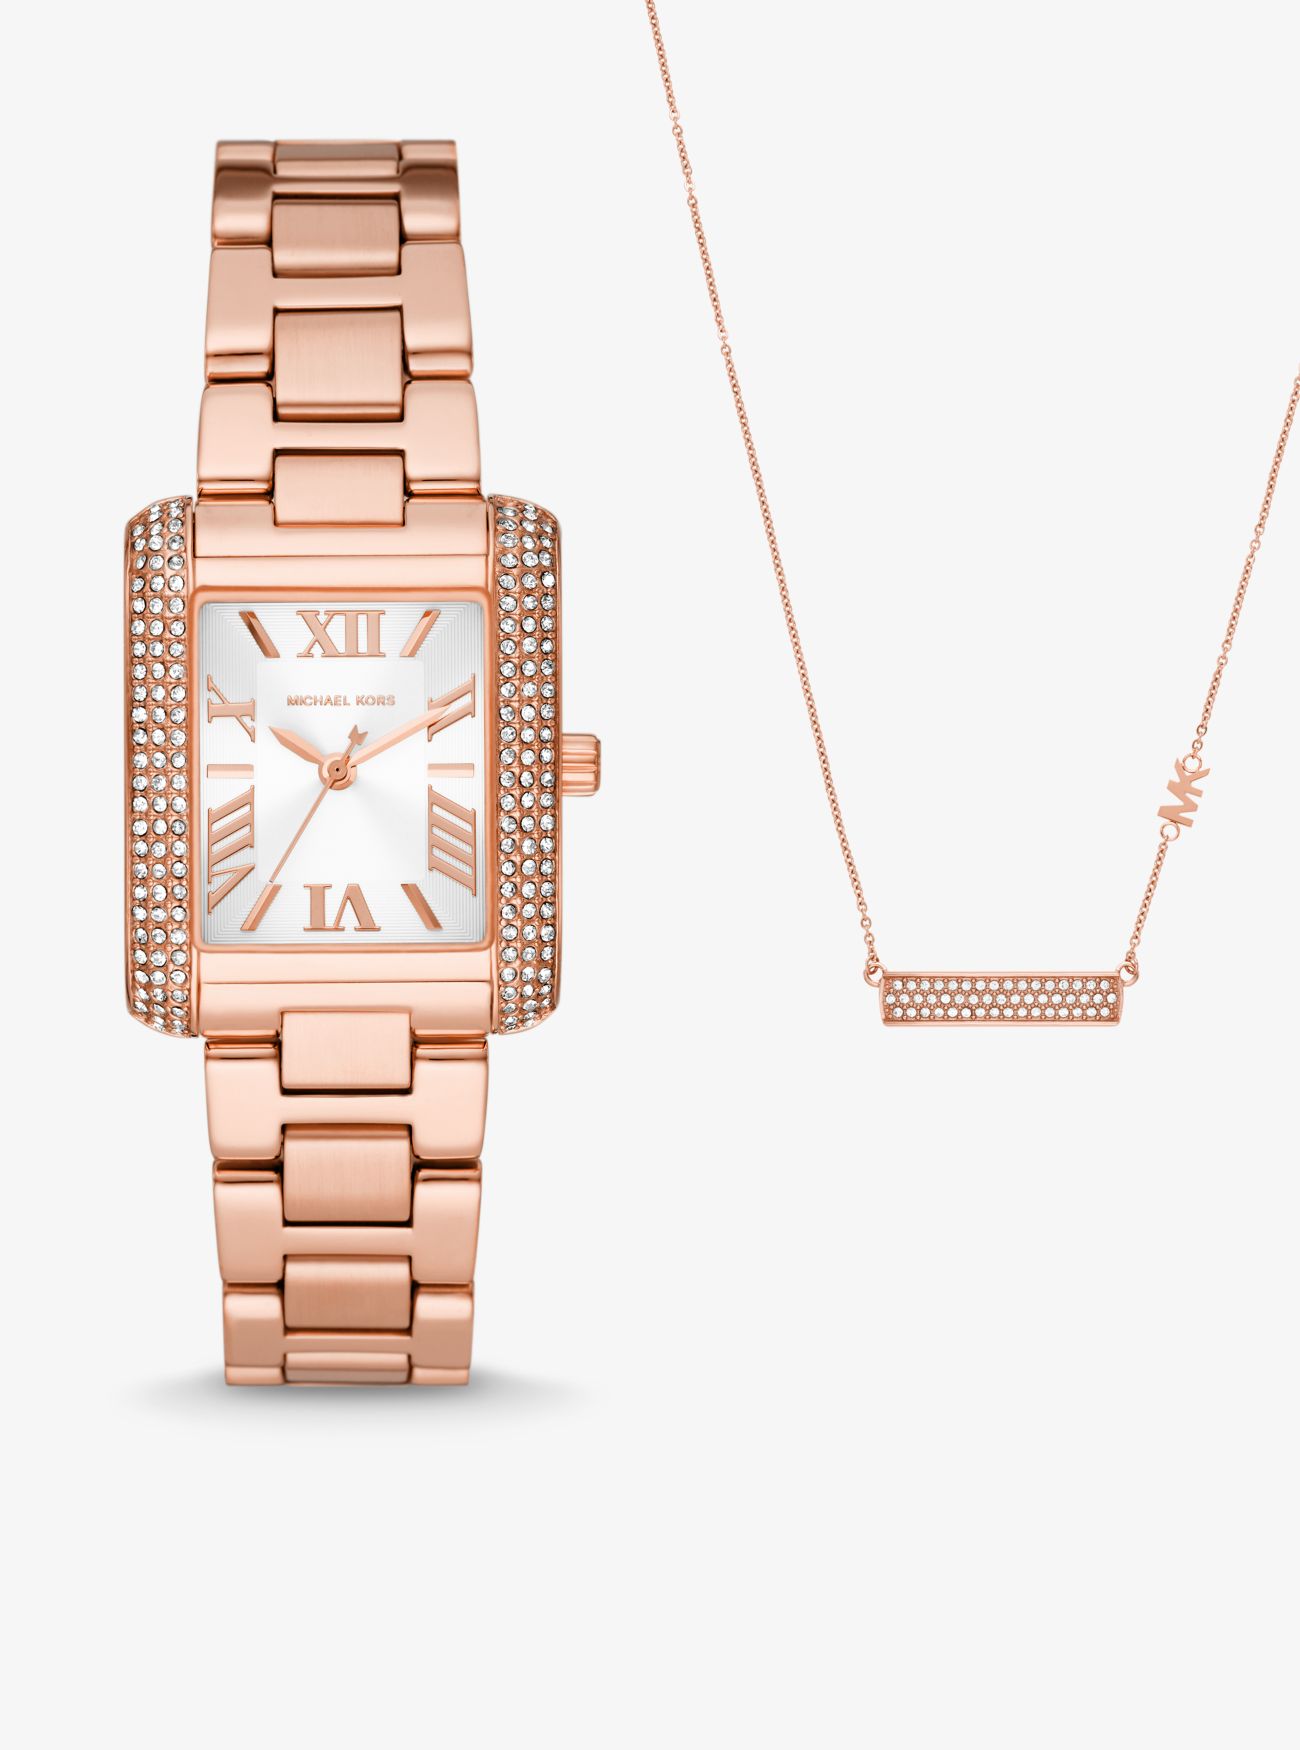 MK Mini Emery PavÃ© Rose Gold-Tone Watch and Necklace Gift Set - Rose Gold - Michael Kors